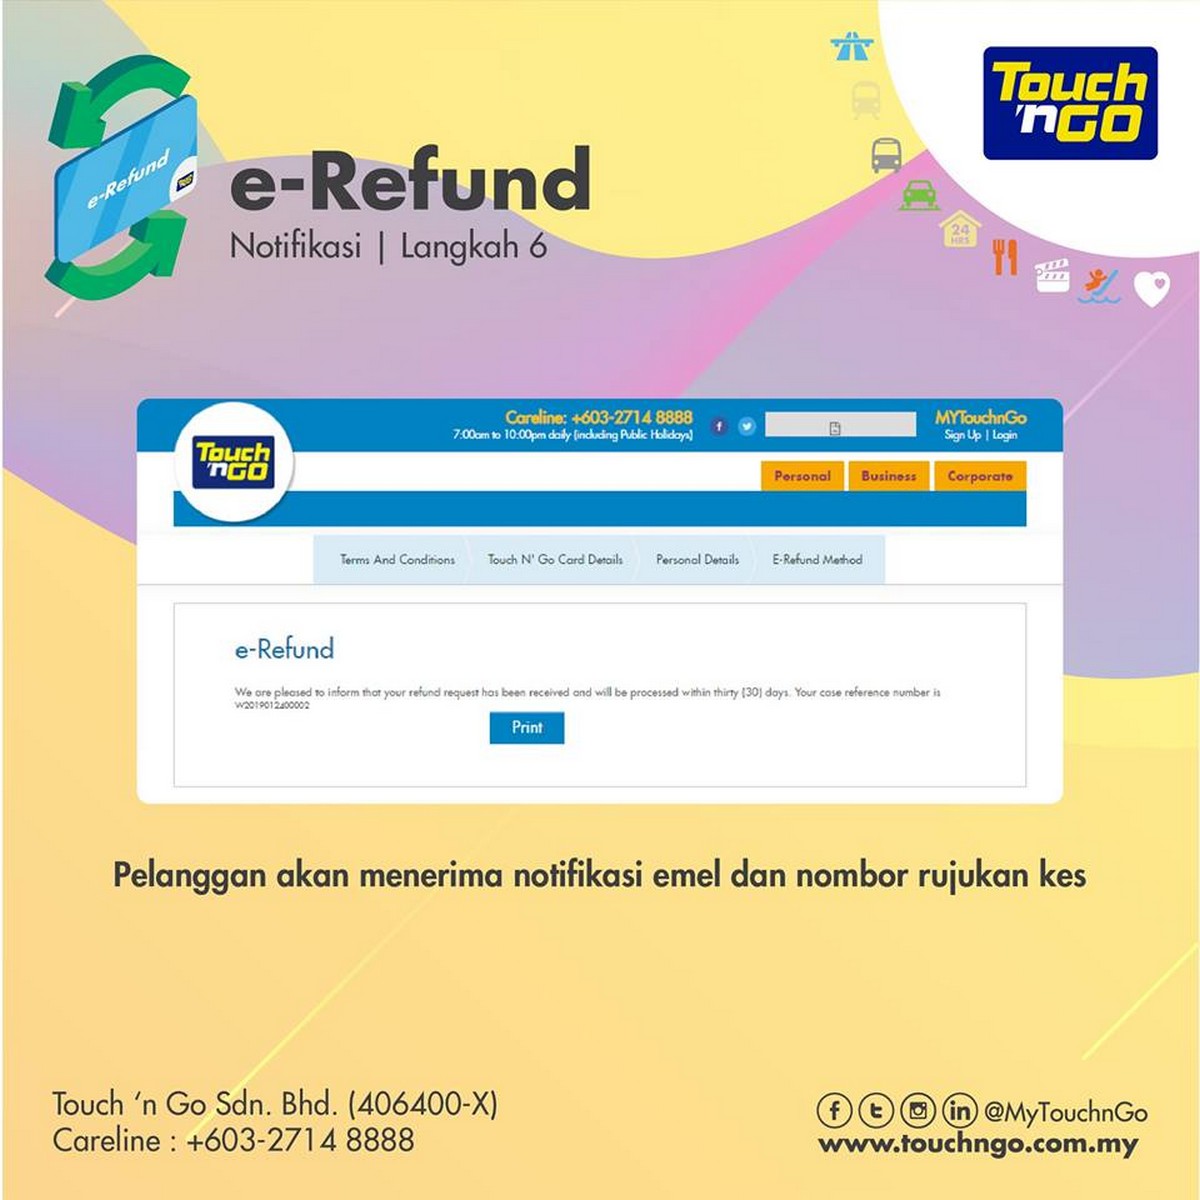 Touch'n Go launches e-Refund service! You can apply for ...